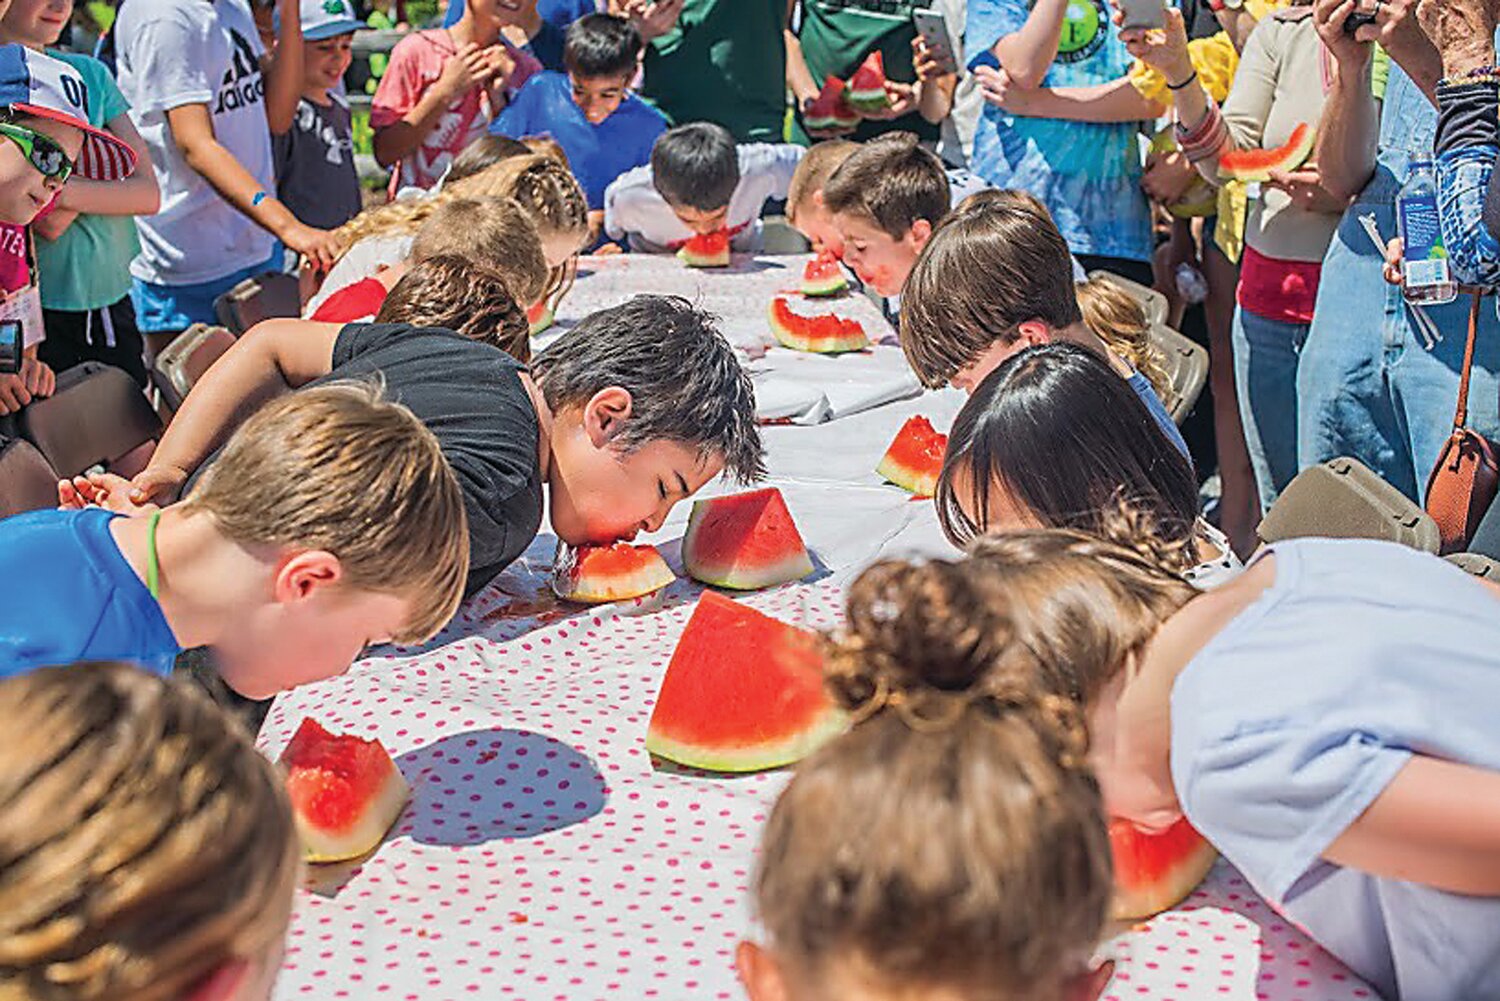 Children take part in a previous Carversville Day watermelon-eating contest.